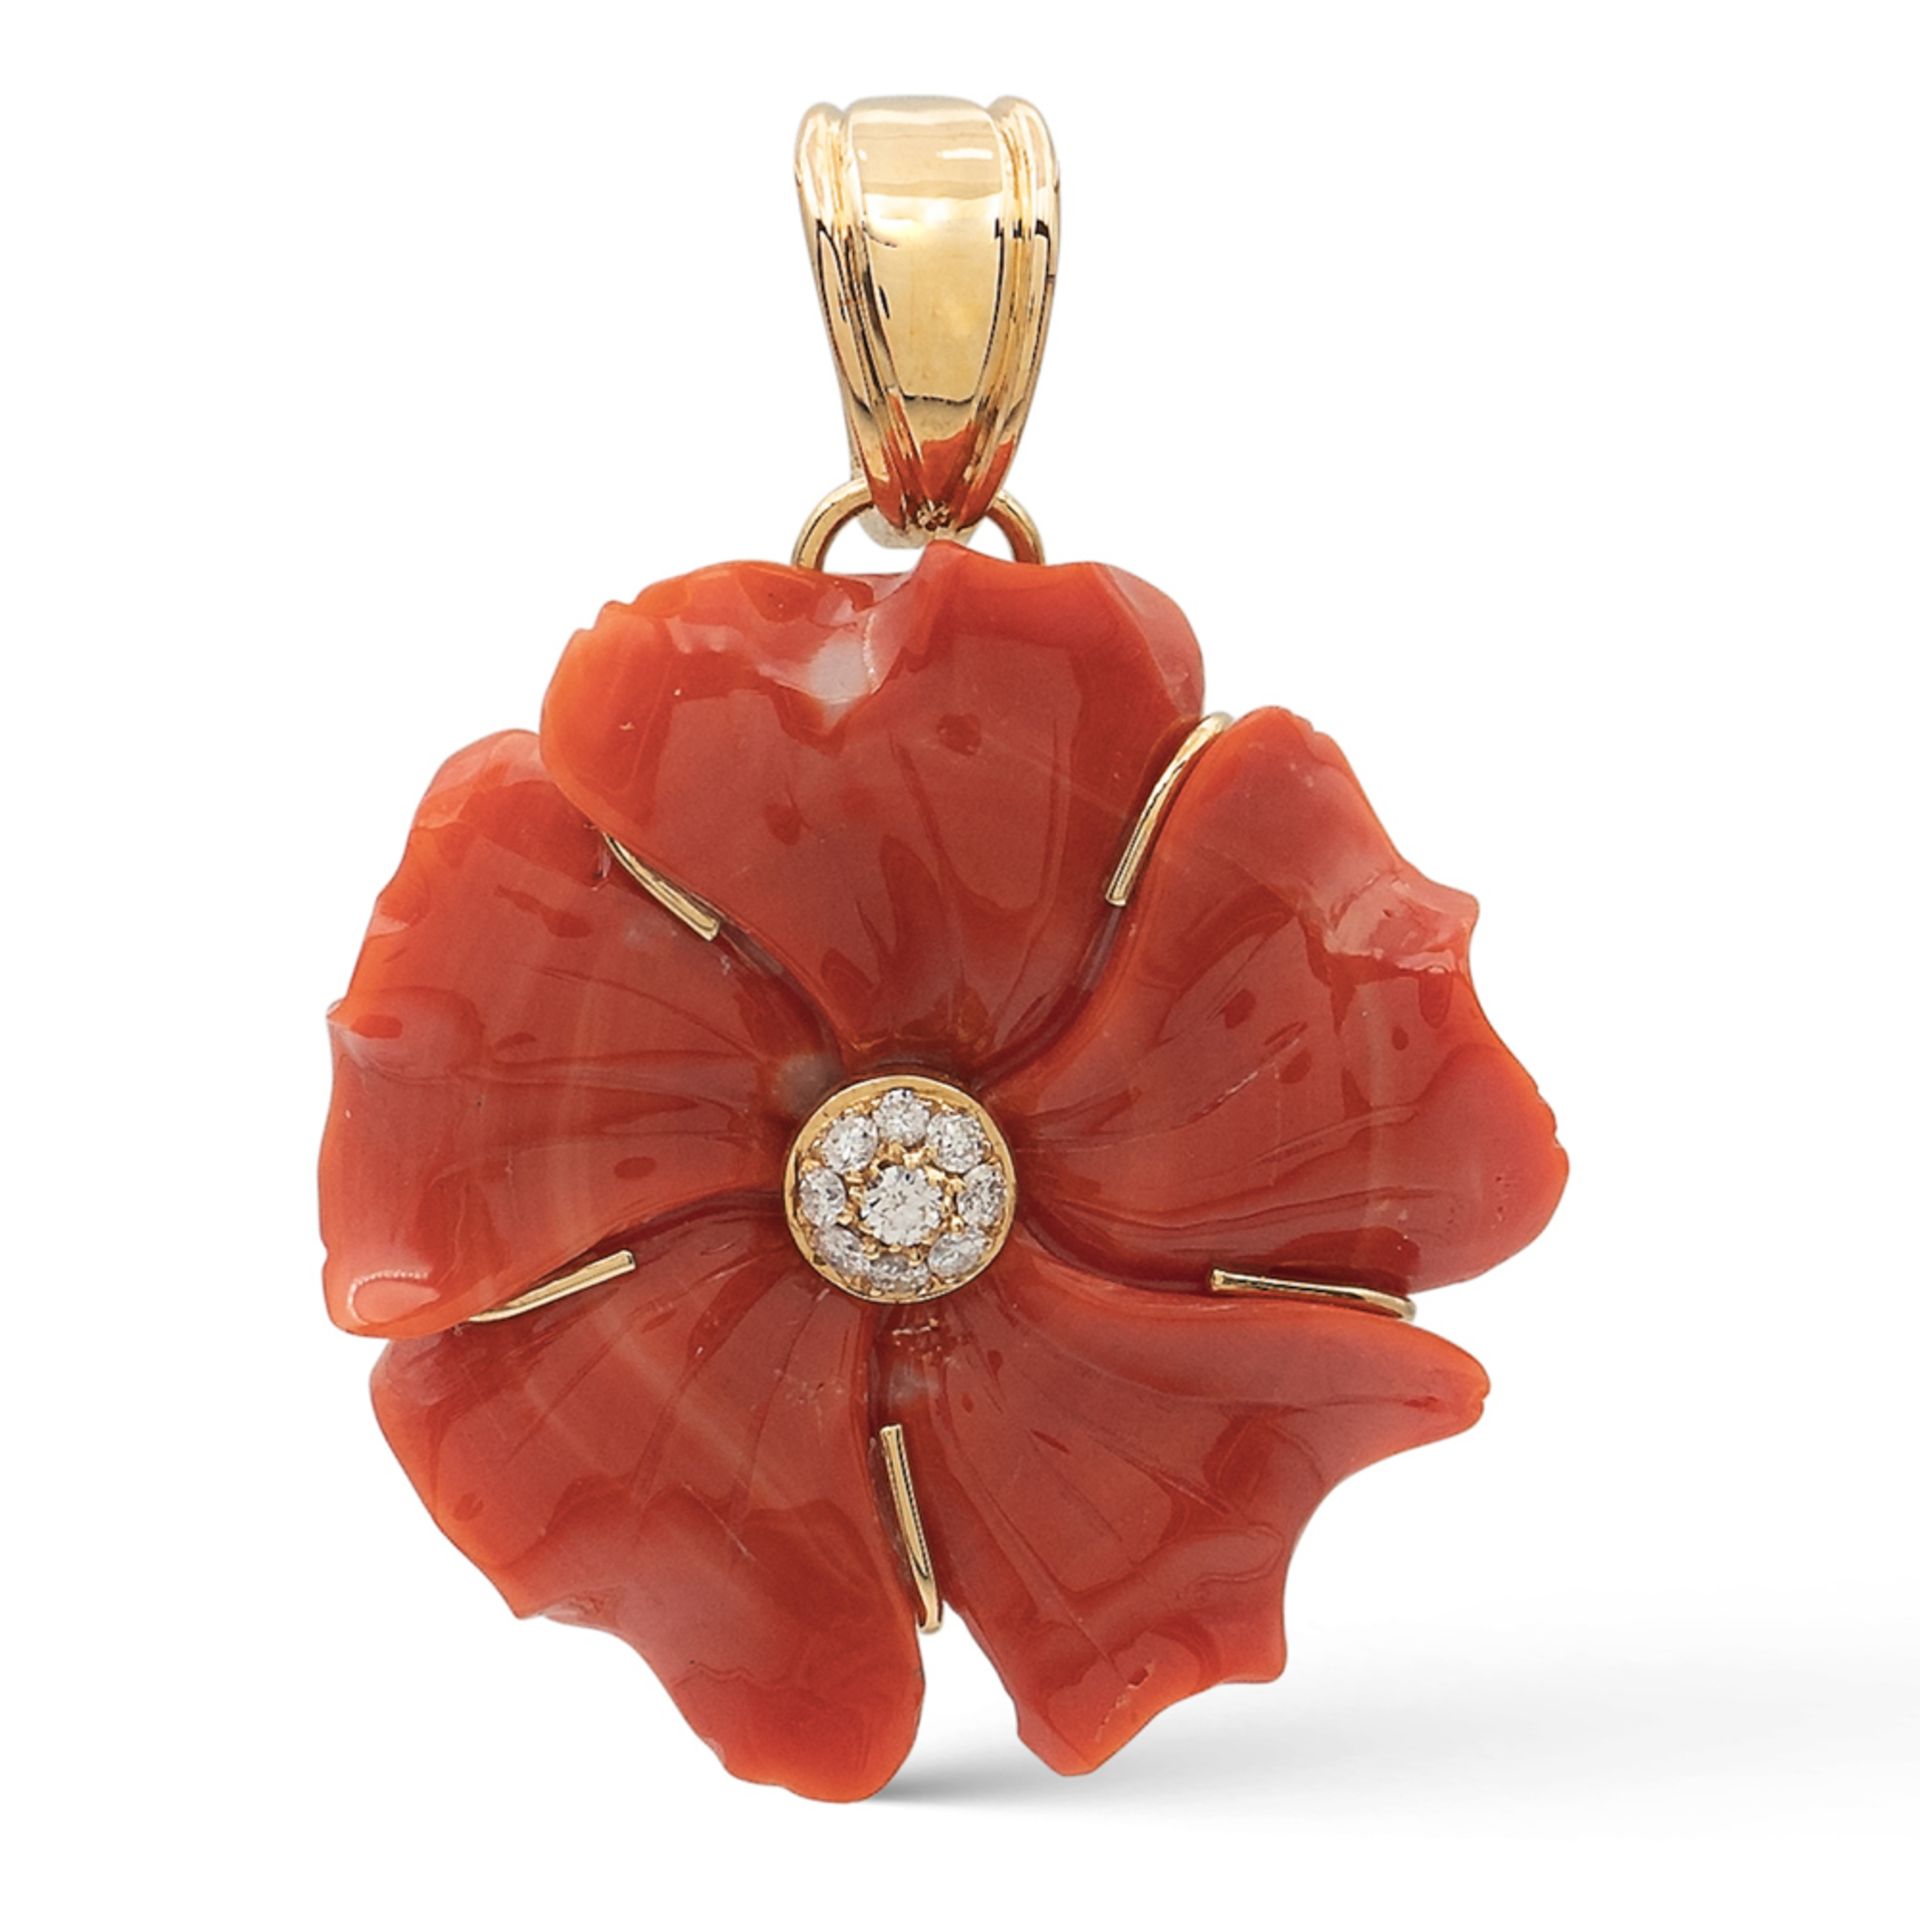 Red coral flower shaped pendant signed Zanetti Roma weight 12,4 gr.